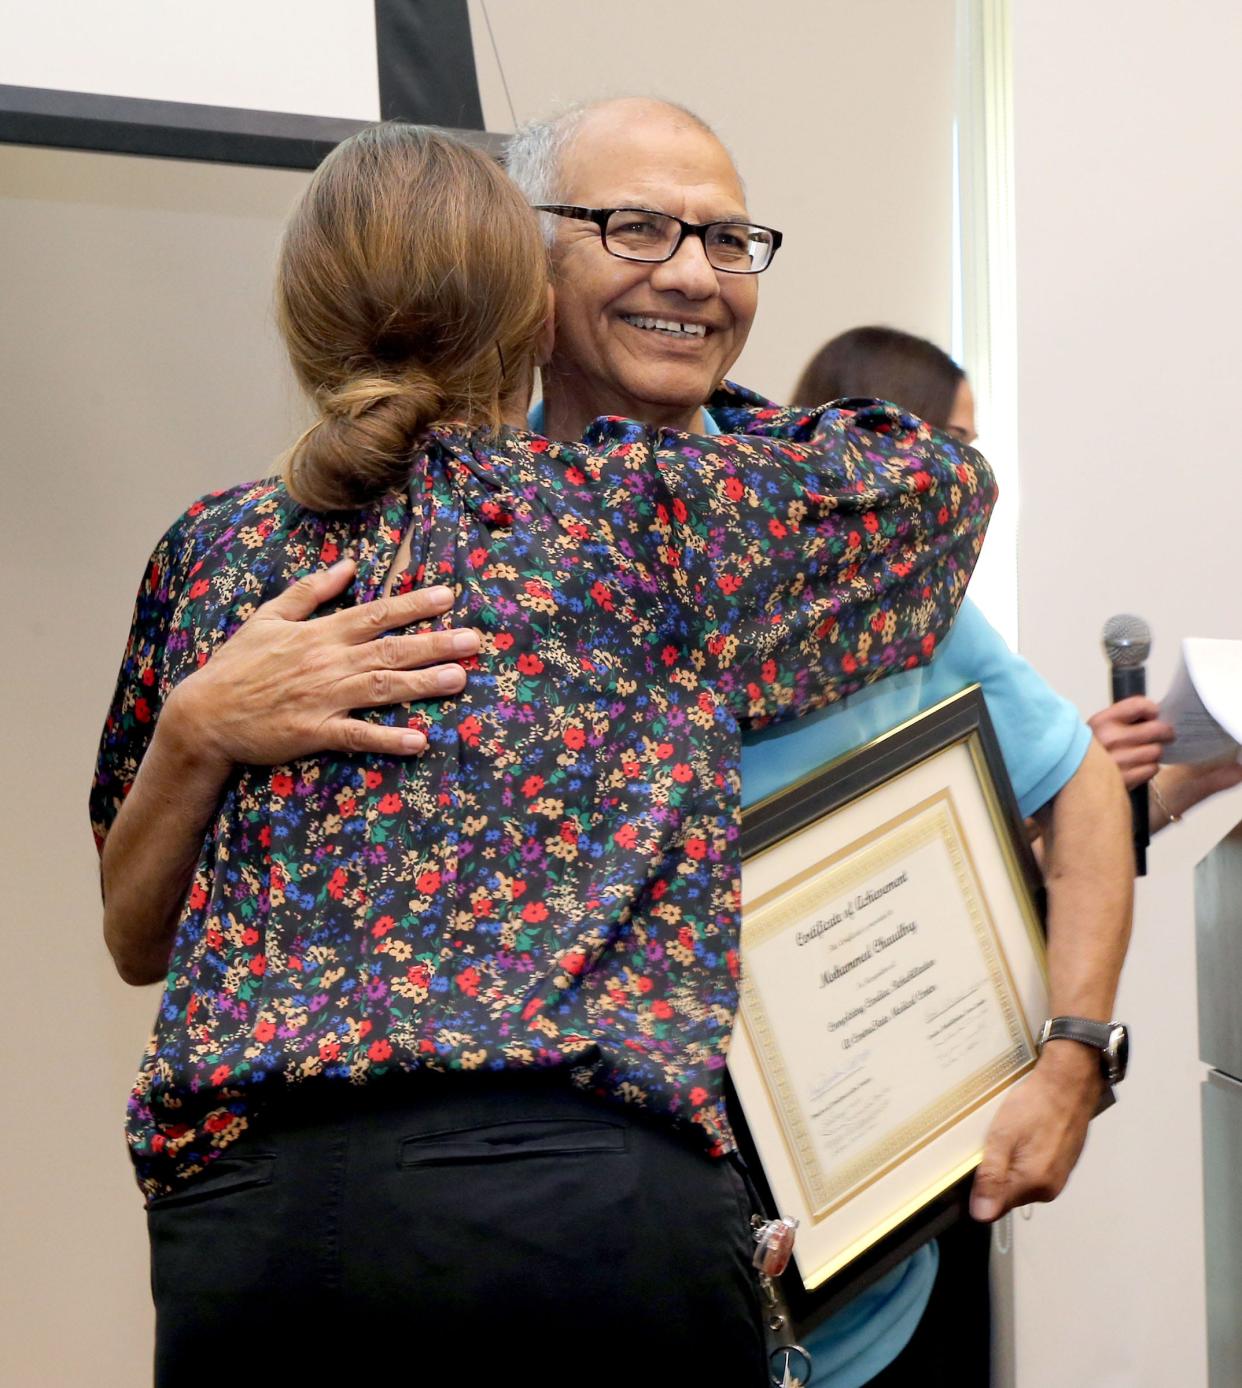 Jackson resident Mohammed Chaudhry receives a hug from a member of the cardiovascular team at CentraState Medical Center in Freehold on his "graduation day" August 31, 2023.